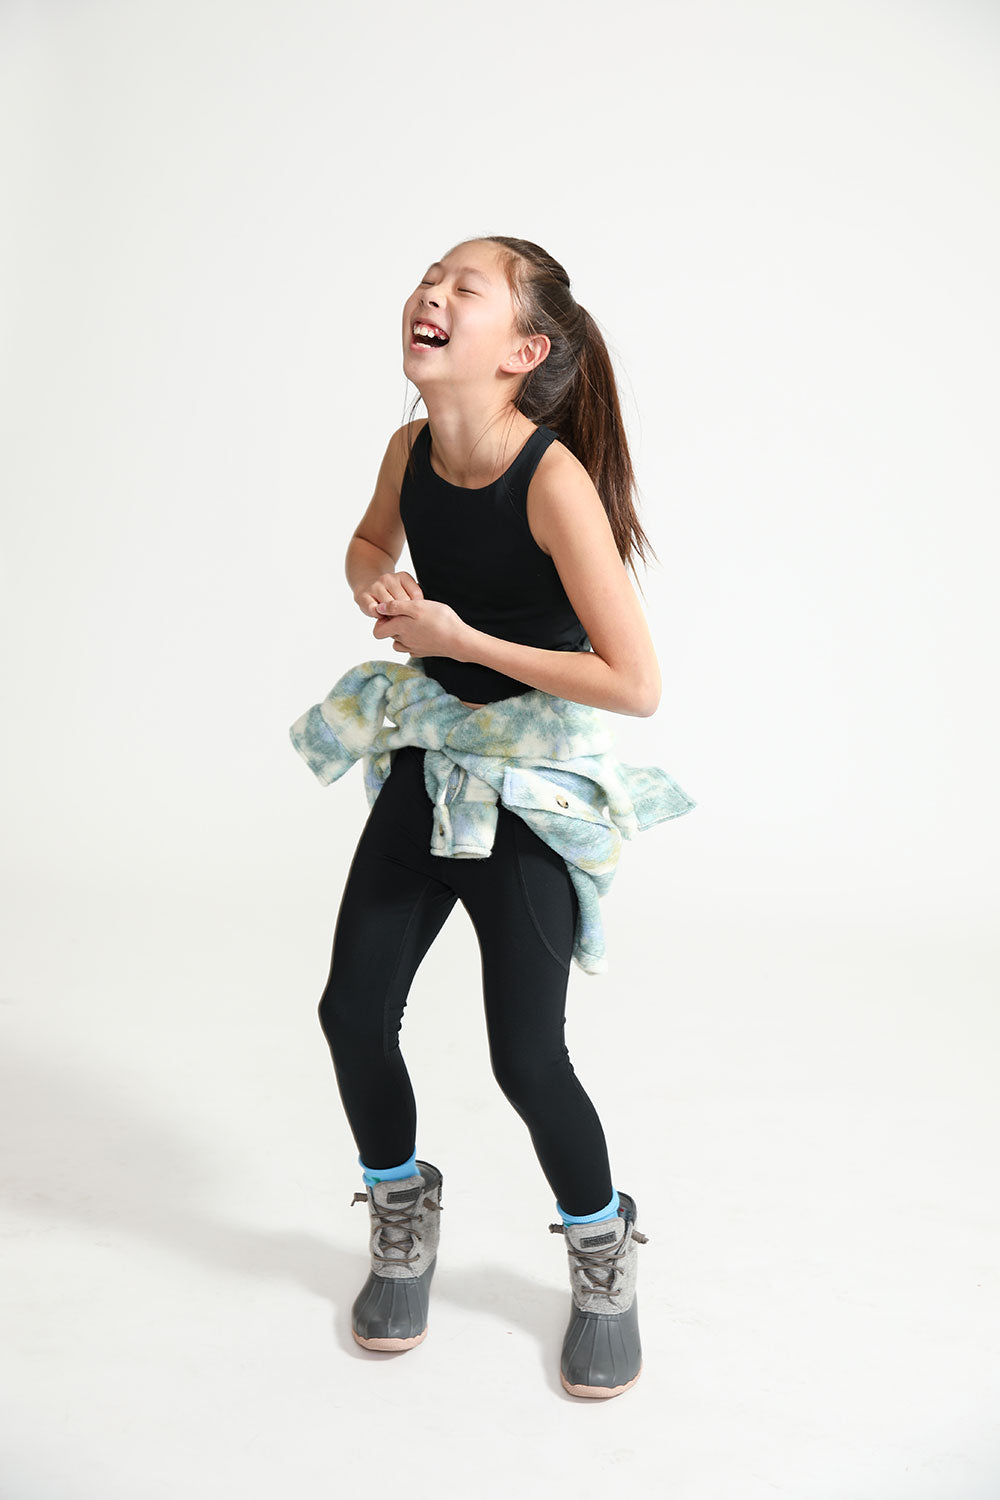 Young girl laughing while wearing Everyway kids activewear. Featuring black Longline Crop and All Day Leggings.